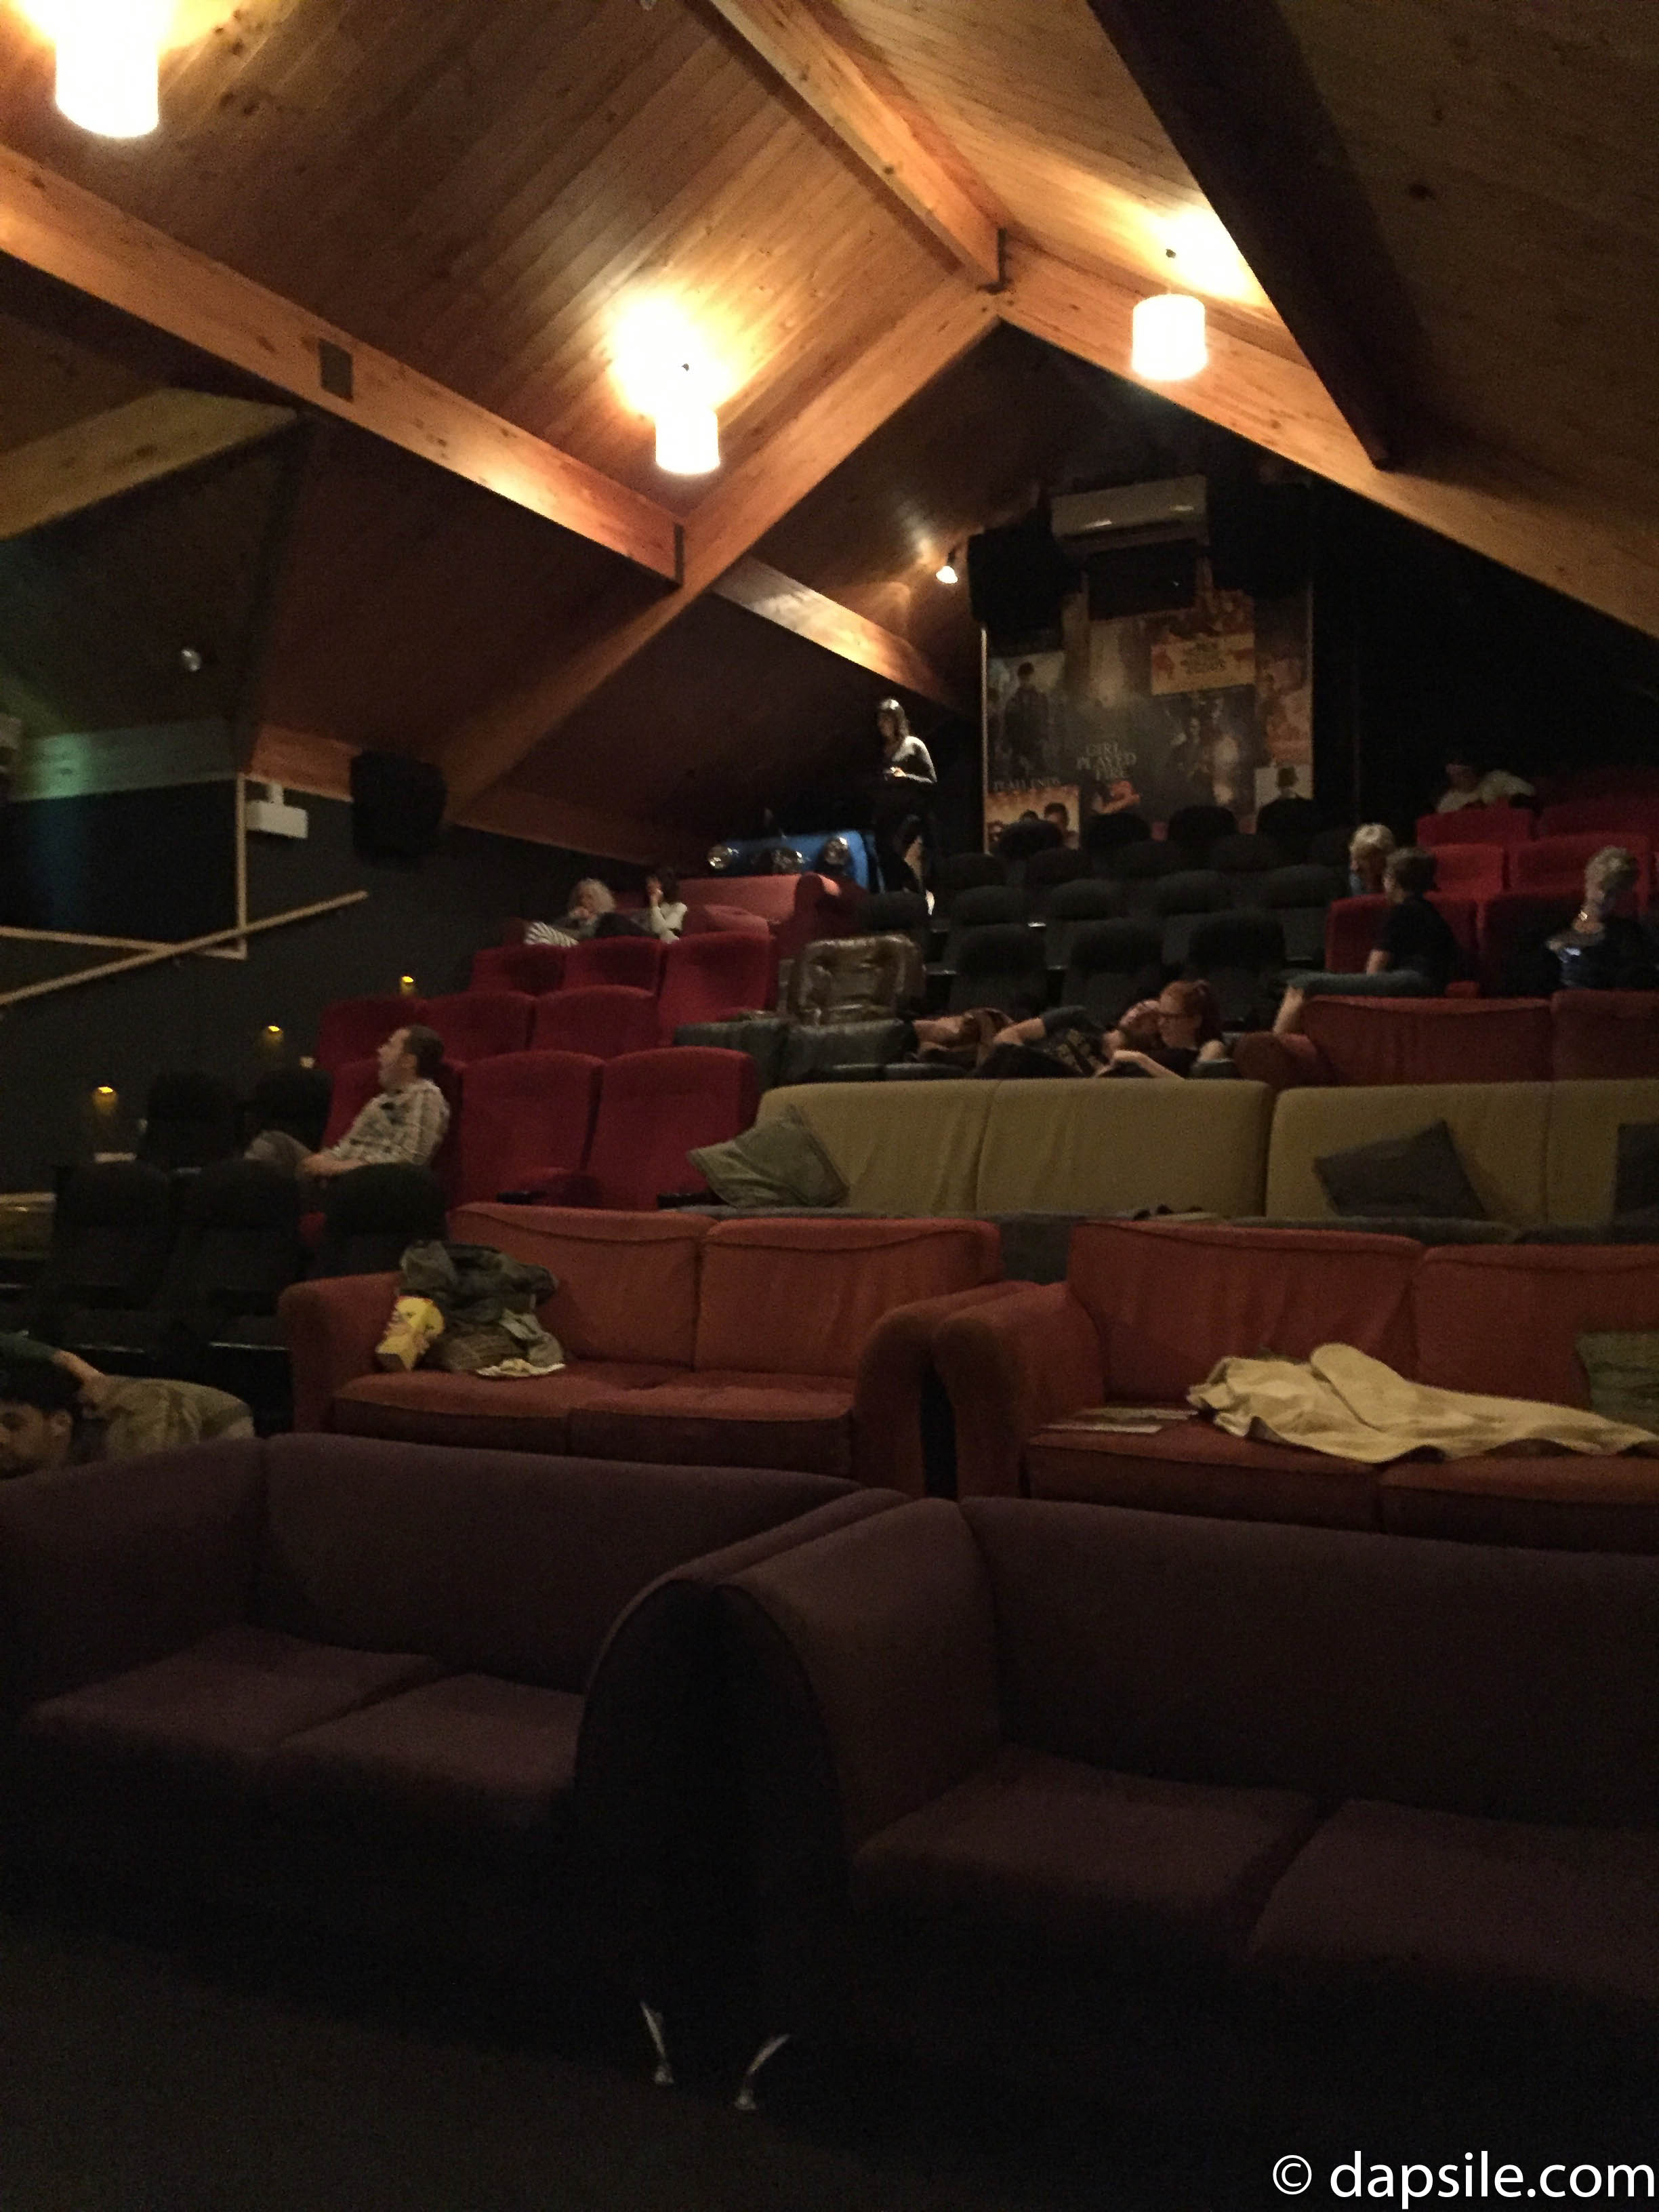 looking at the Cinema Paradiso Seating from the screen